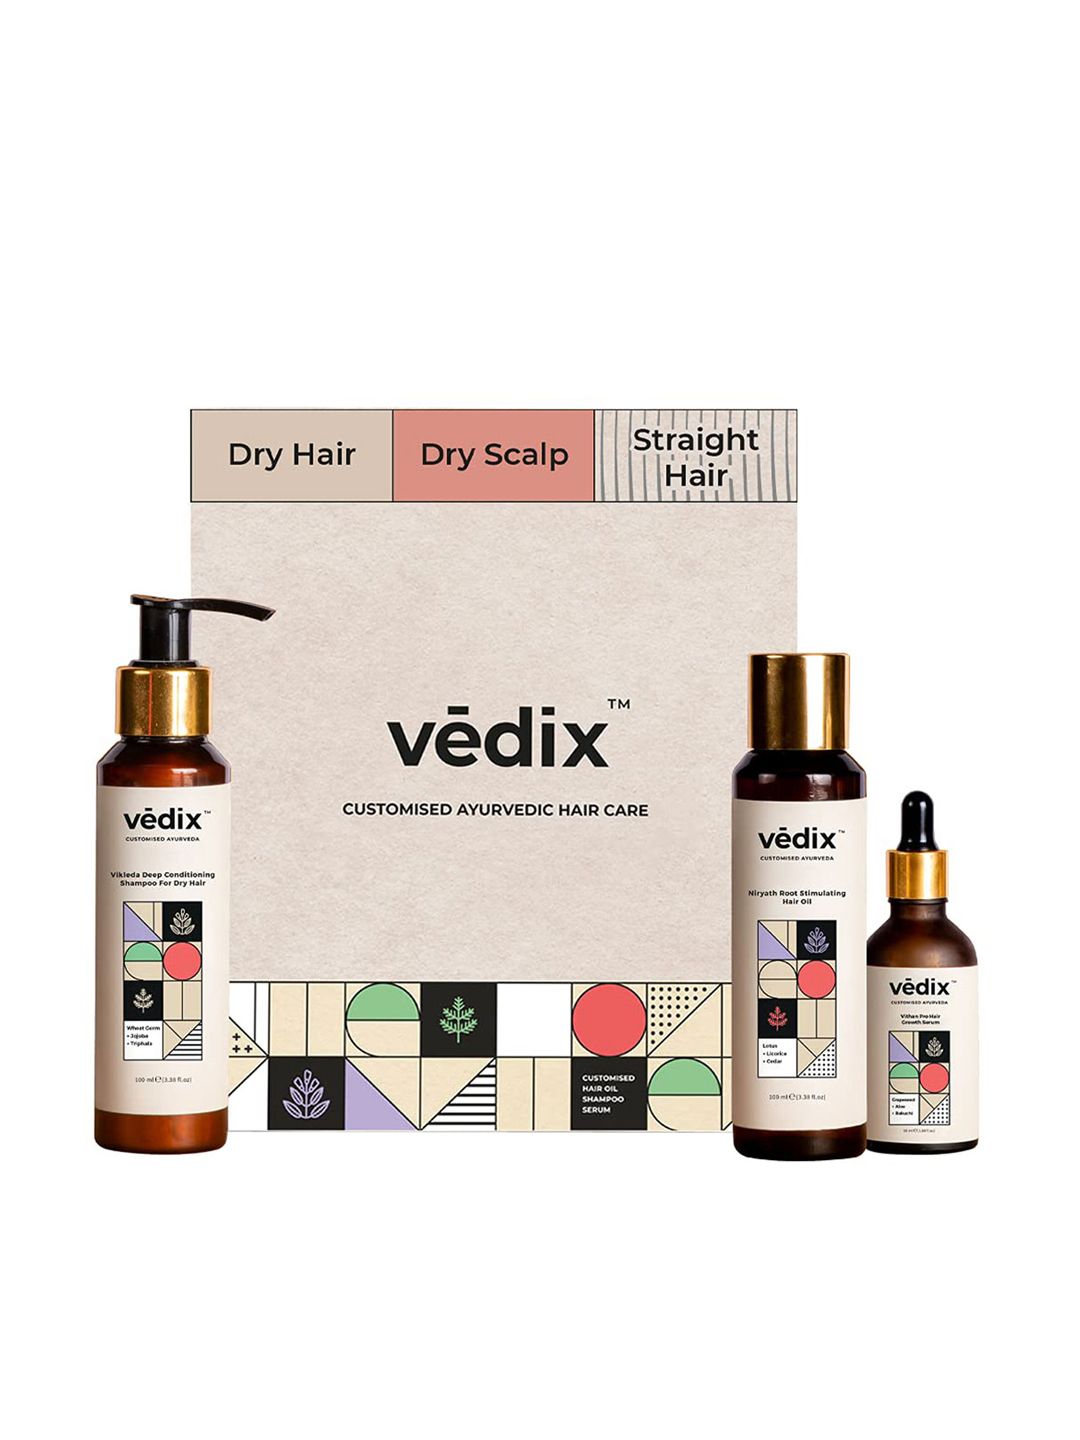 Vedix Customized Hair fall Control Regimen for Dry Hair -  Dry Scalp + Straight Hair Price in India